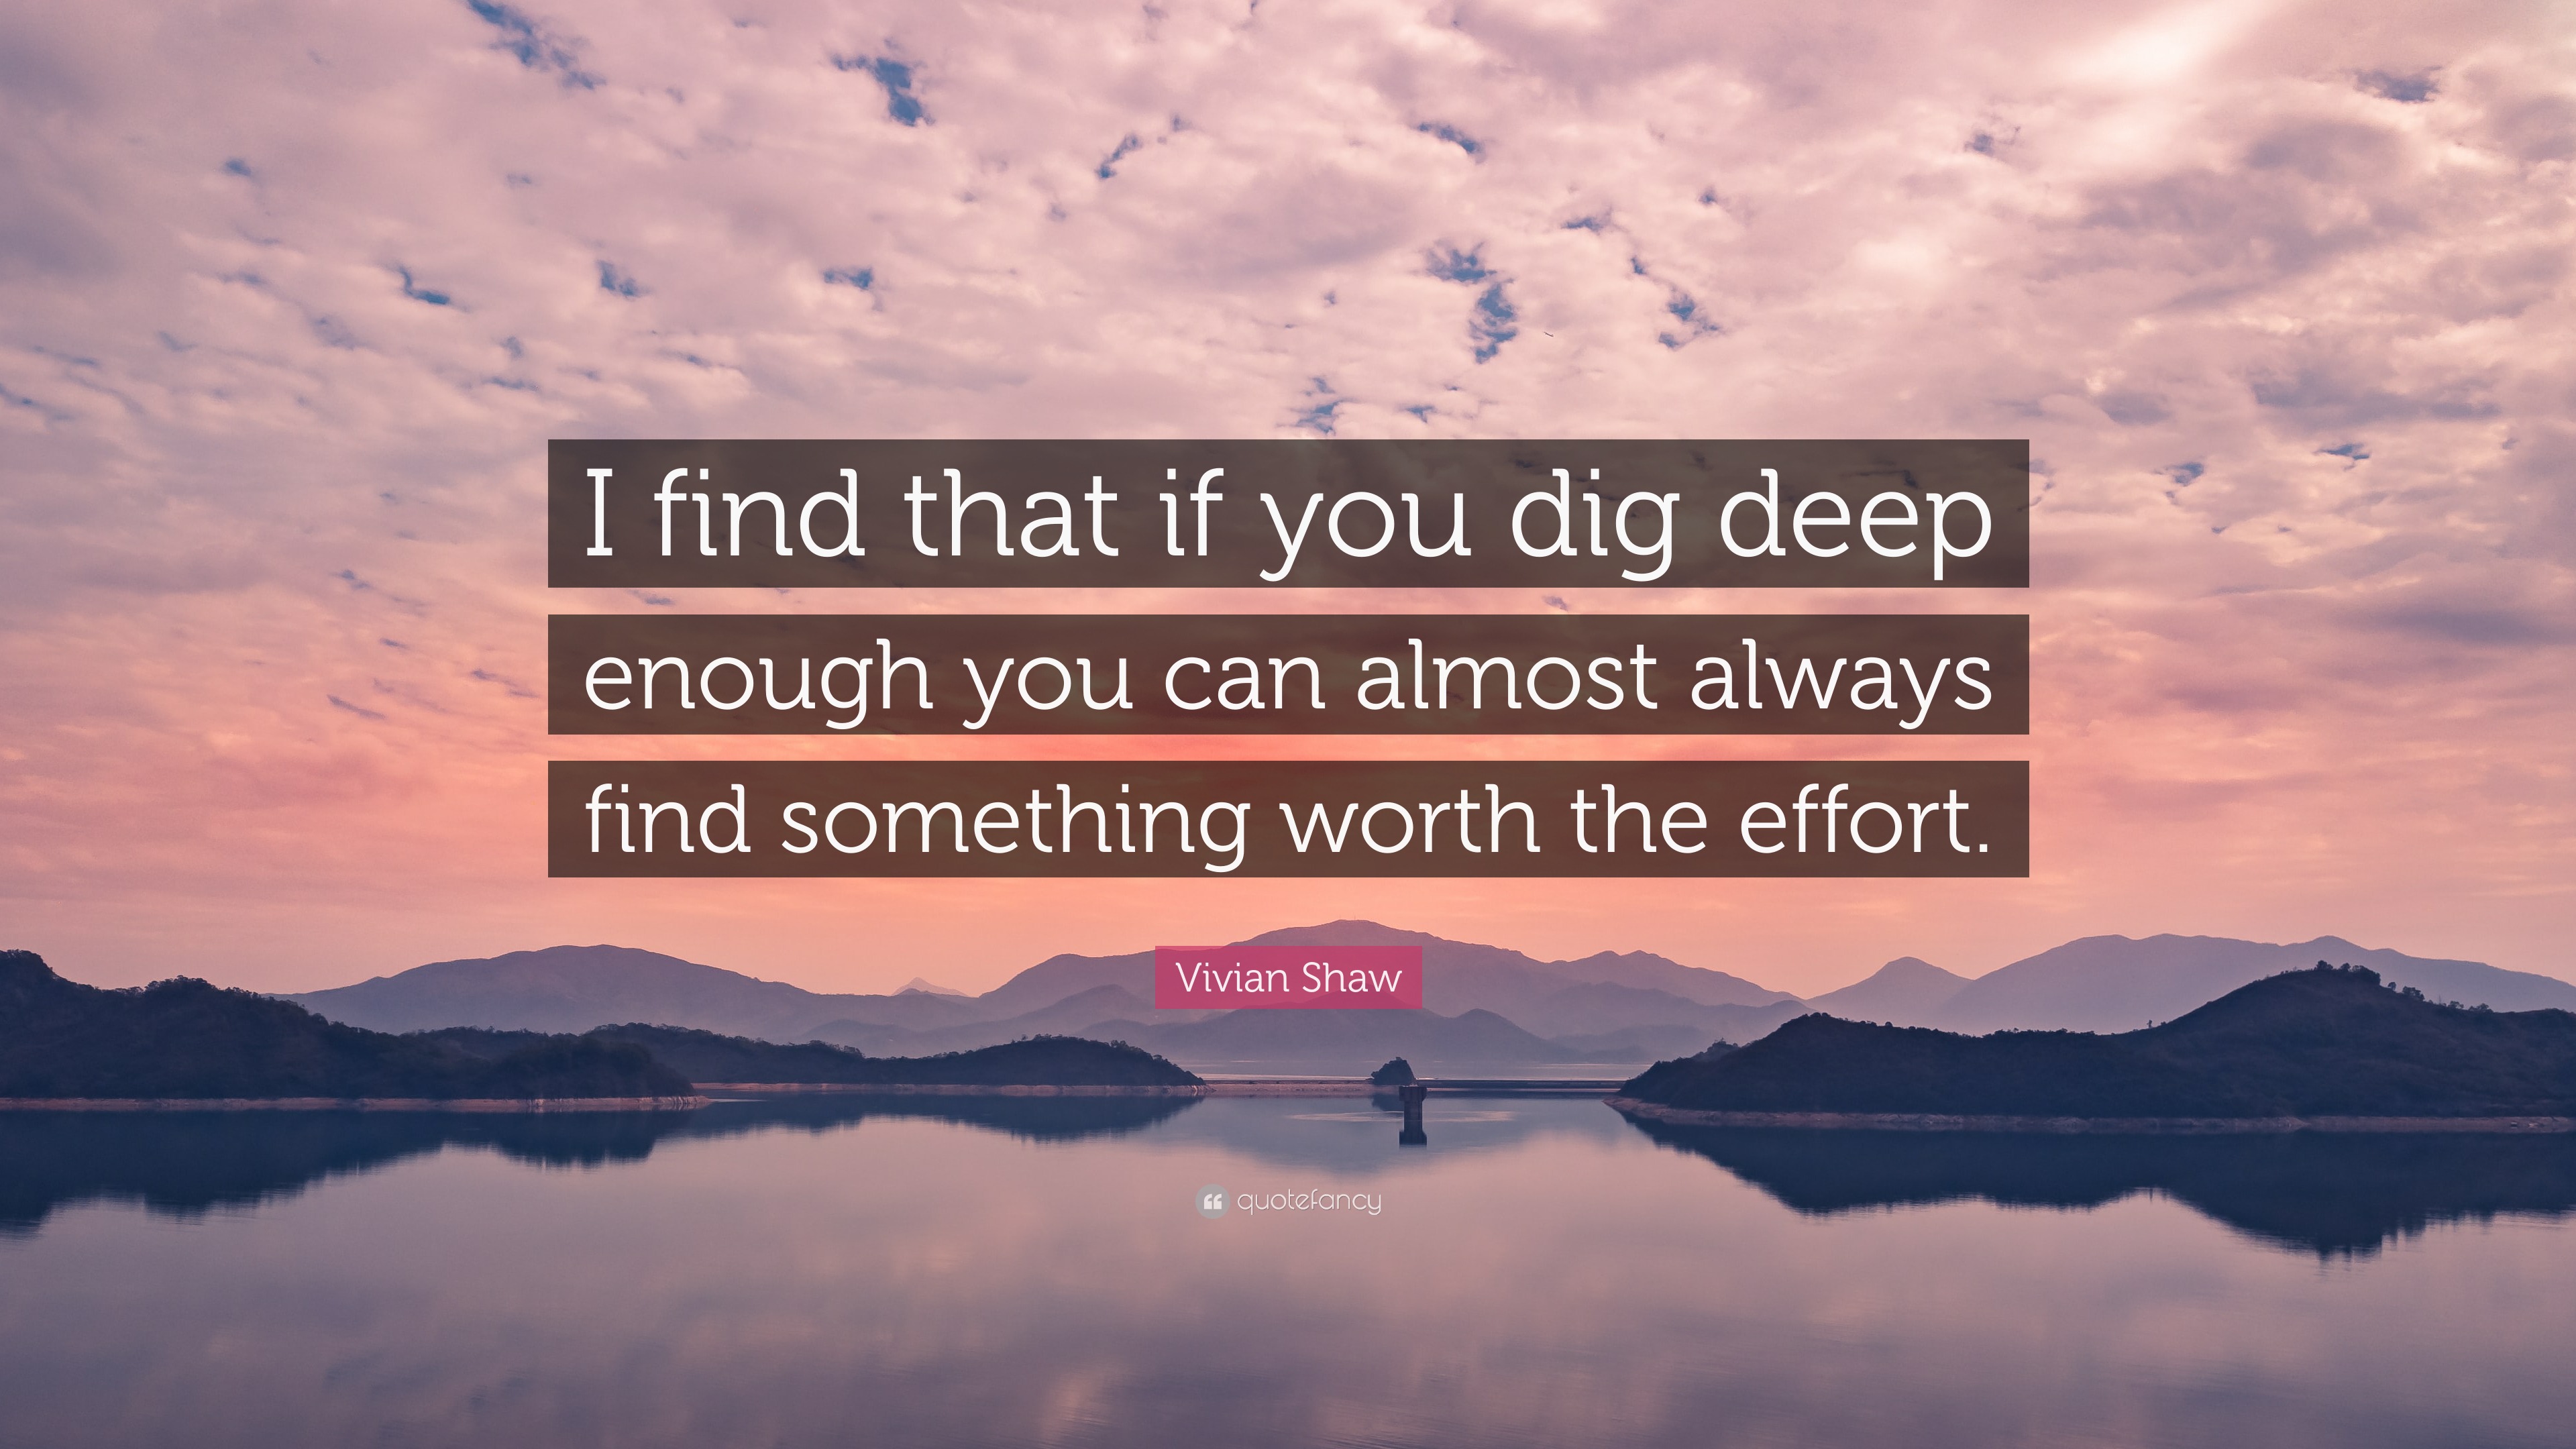 Are you willing to dig deep for your treasure?